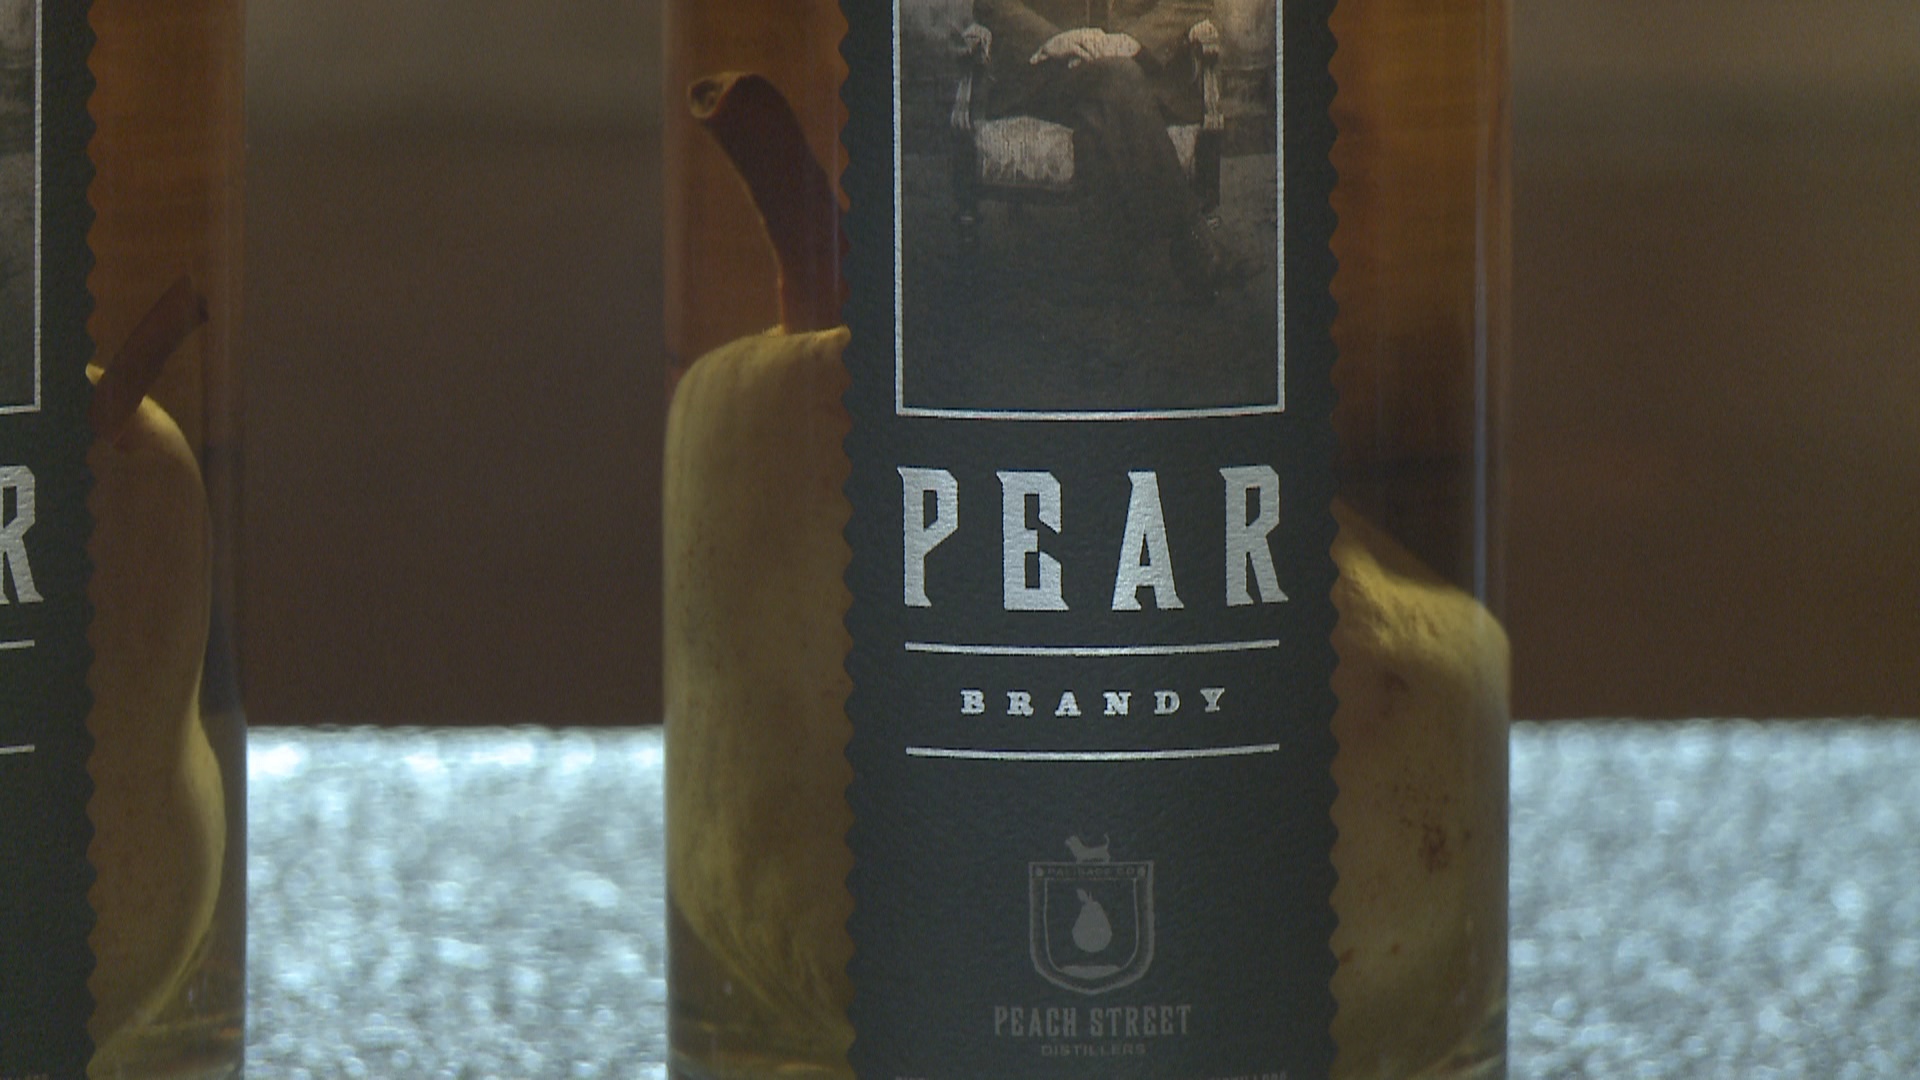 how do brandy distilleries get a whole pear into a bottle of pear brandy